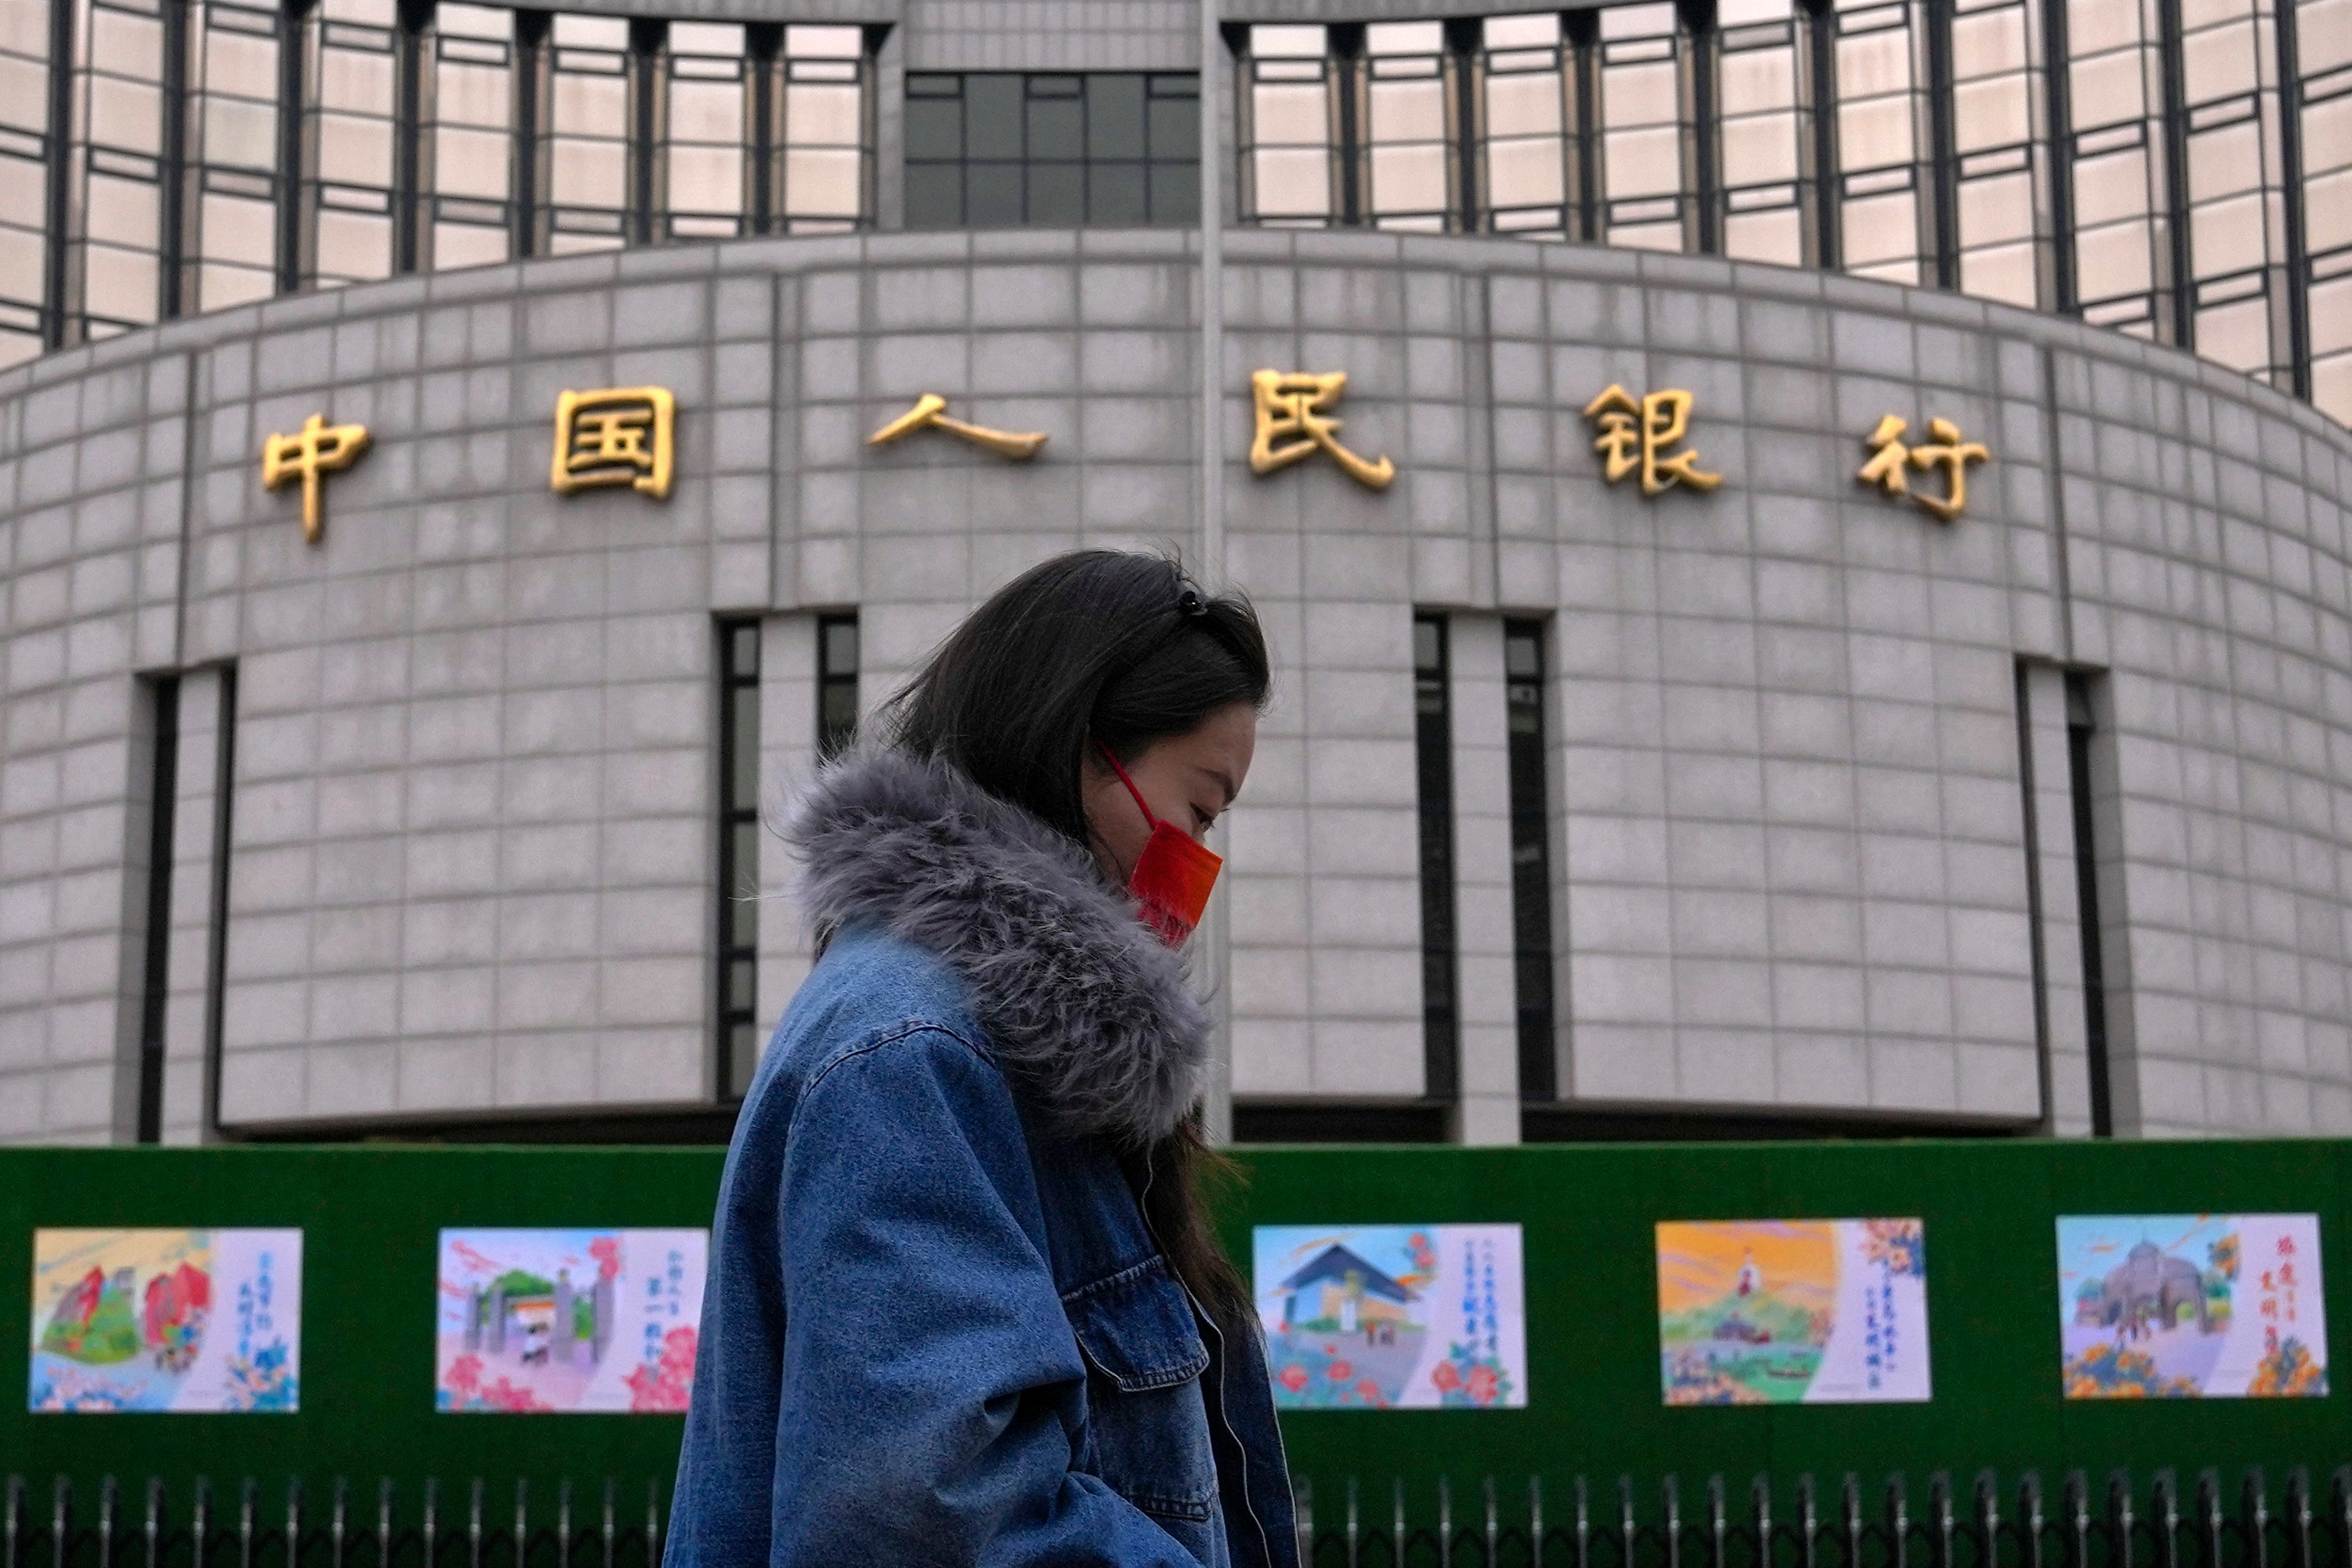 A pedestrian walks by the People’s Bank of China in Beijing on February 20. Amid US dollar strength, China might be tempted to devalue the yuan to improve competitiveness versus the yen and the won. Photo: AP